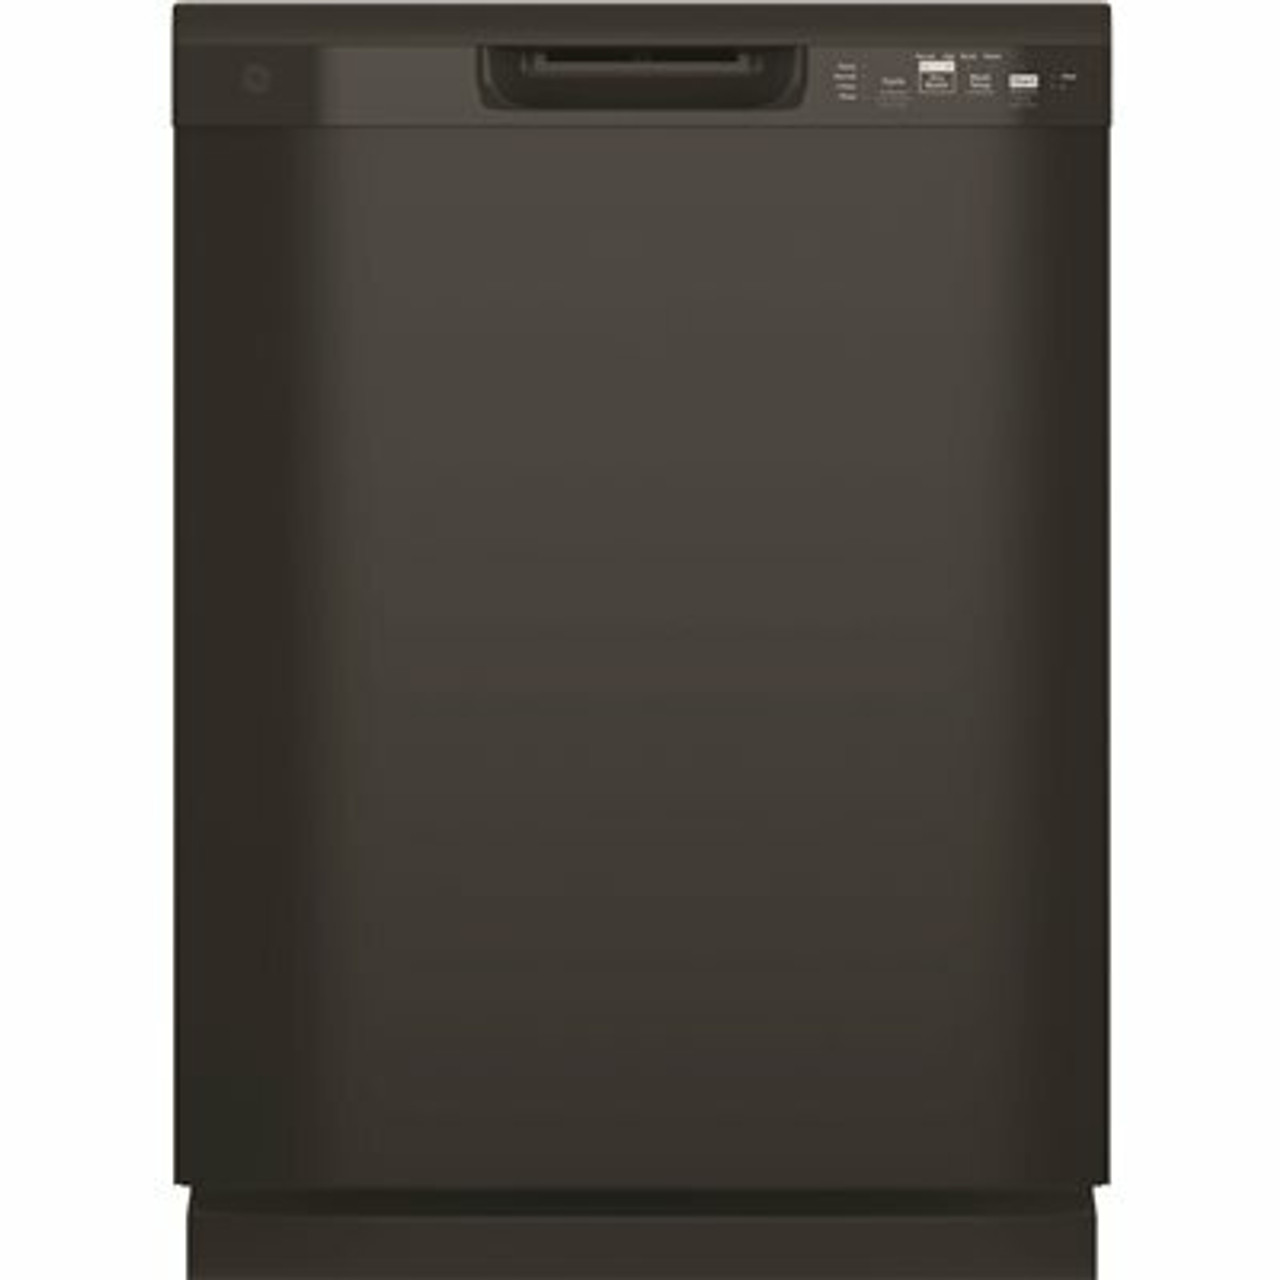 Ge 24 In. Black Front Control Tall Tub Dishwasher With Steam Cleaning, Dry Boost And 59 Dba